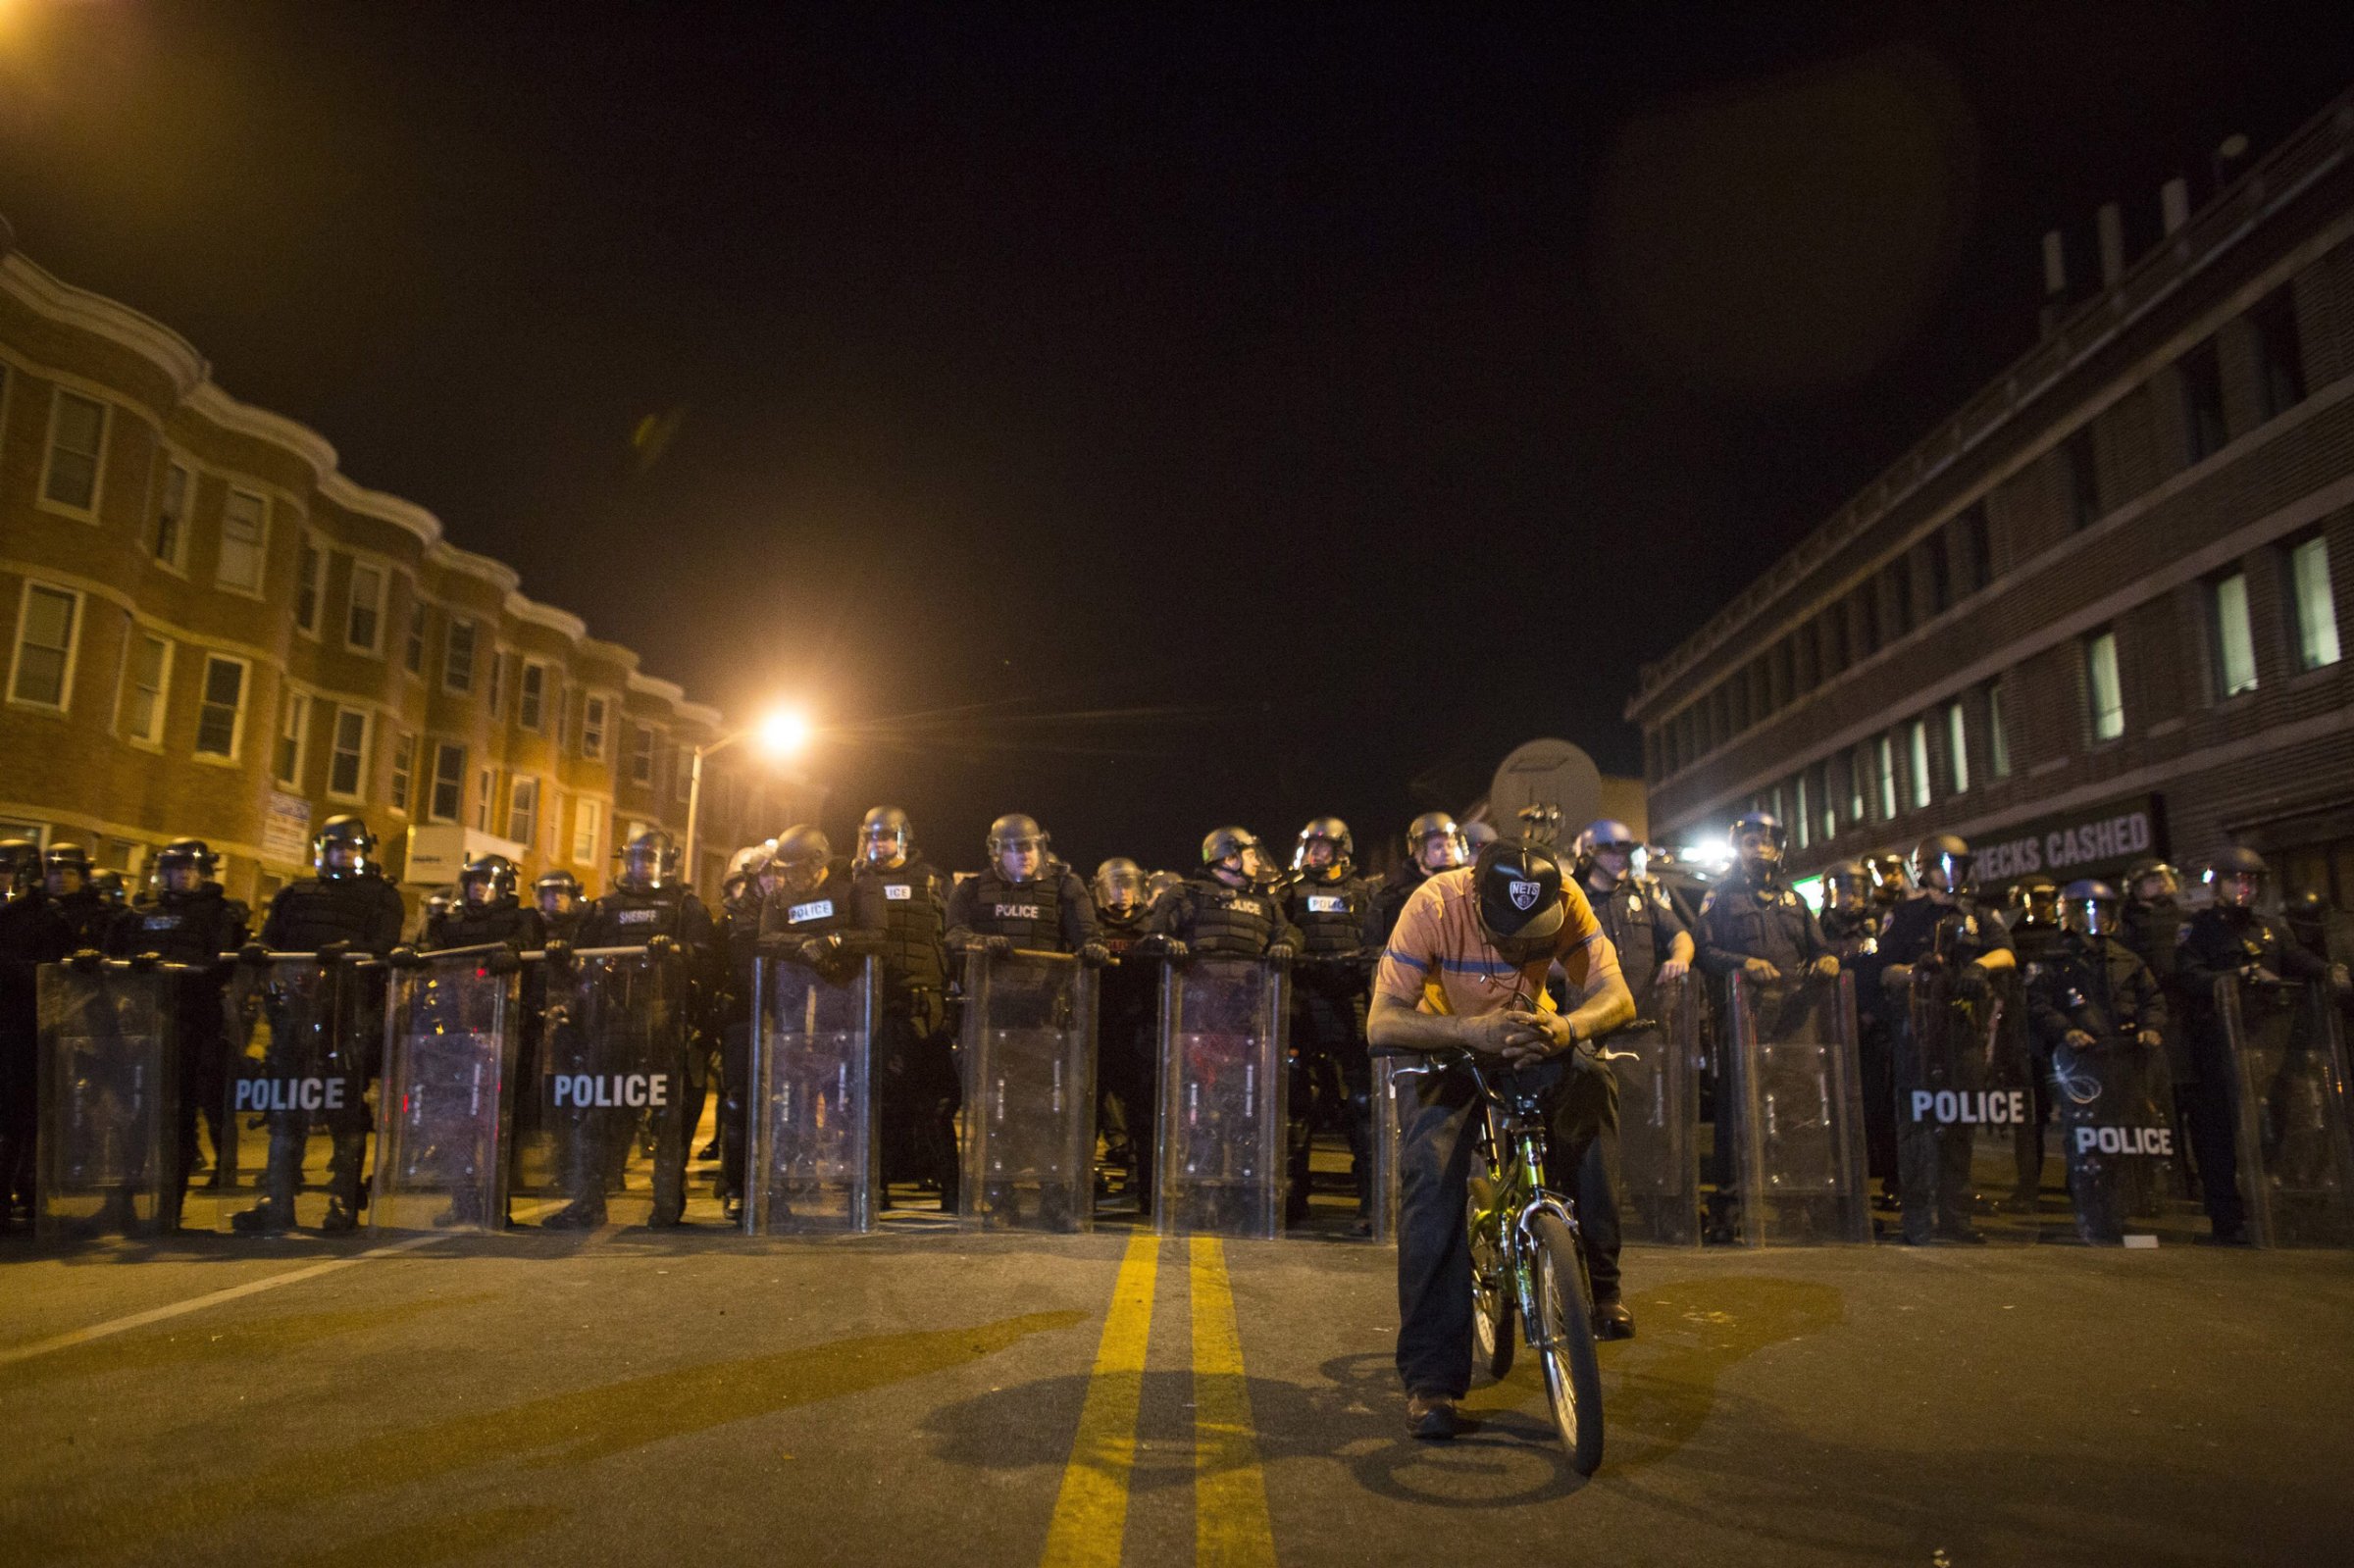 epa04988256 YEARENDER 2015 APRIL A protester on his bike is seen in front of a line of policemen in riot gear during a 10 p.m. curfew in Baltimore, Maryland, USA, 28 April 2015. Tensions eased on 28 April after peace-keeping civilians kept rock-throwing protestors at bay from lines of police in riot gear. EPA/JOHN TAGGART